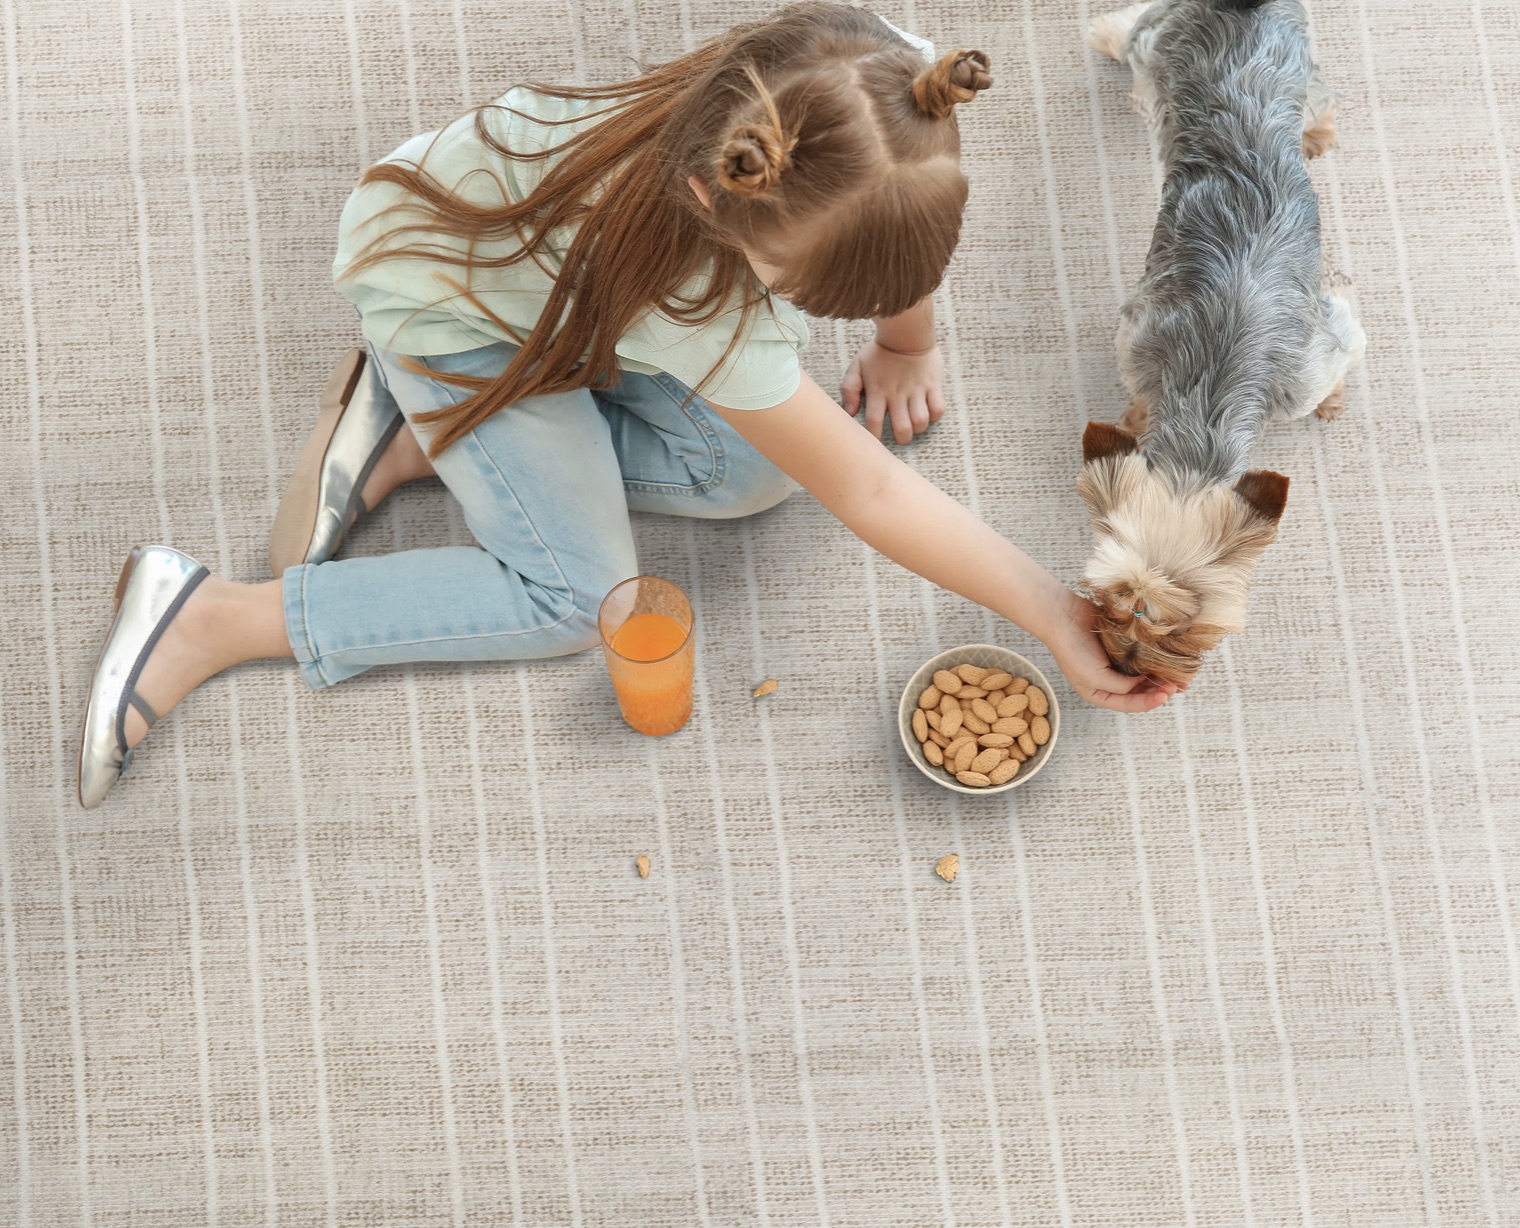 Child with food and pet dog on high performance carpet